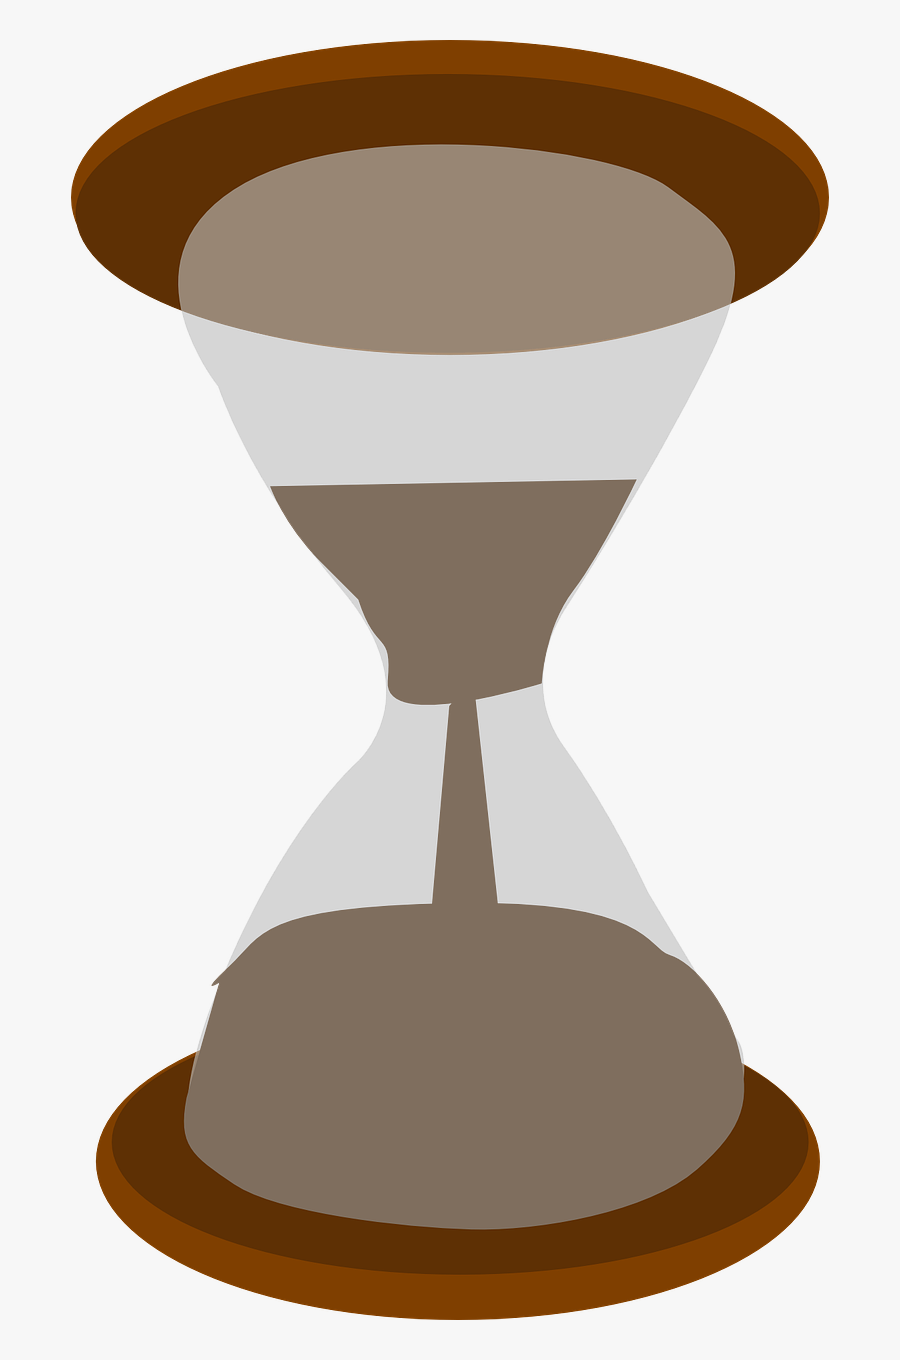 Transparent Time Running Out Clipart, Transparent Clipart